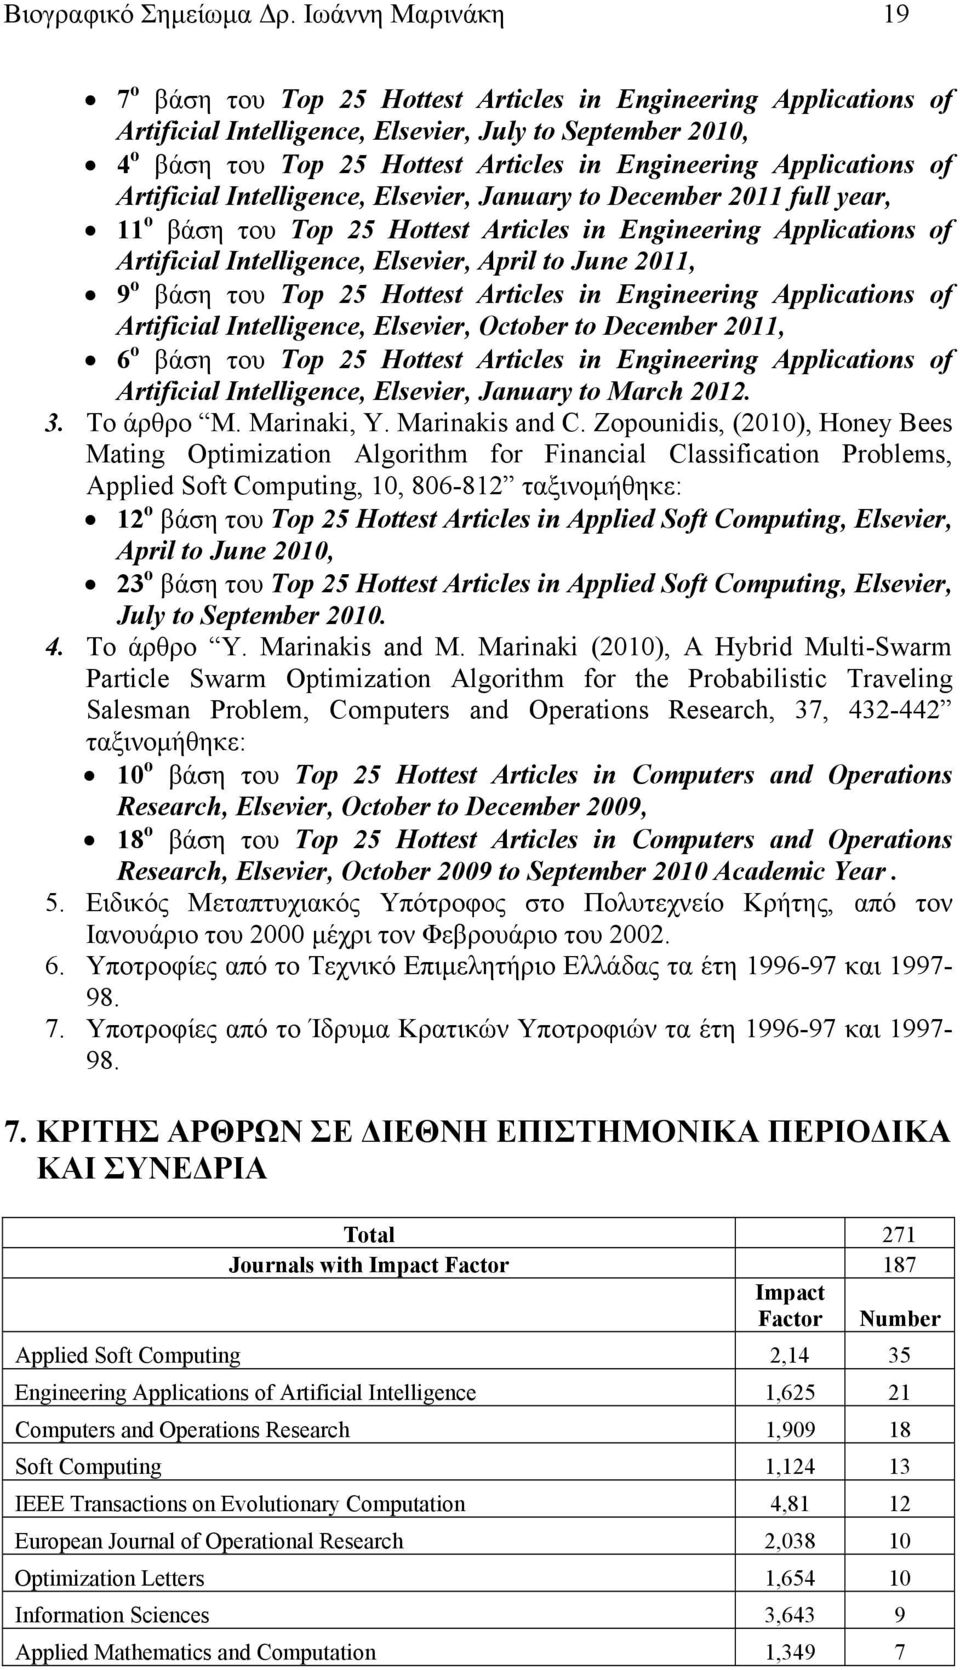 Applications of Artificial Intelligence, Elsevier, January to December 2011 full year, 11 ο βάση του Top 25 Hottest Articles in Engineering Applications of Artificial Intelligence, Elsevier, April to